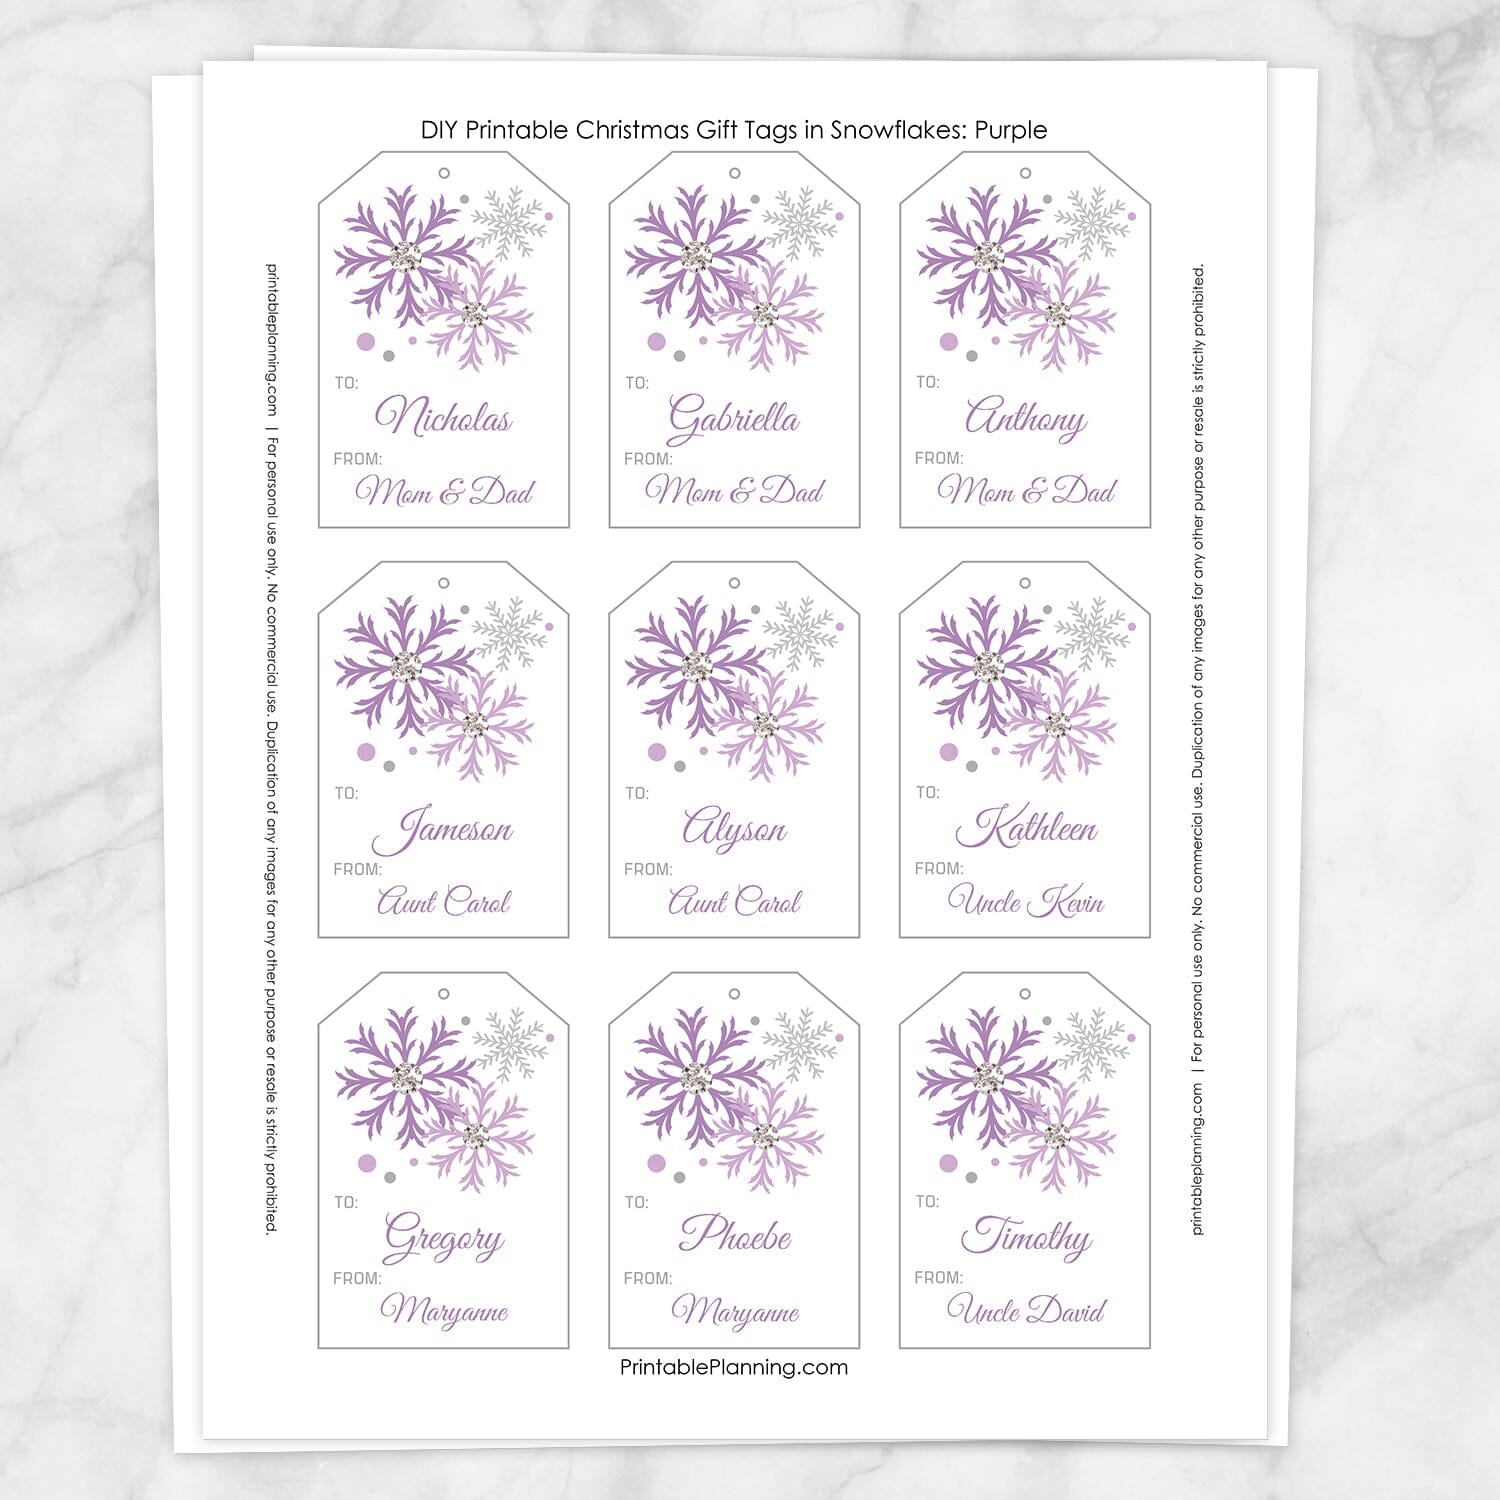 Printable Snowflake Personalized Gift Tags in Purple at Printable Planning